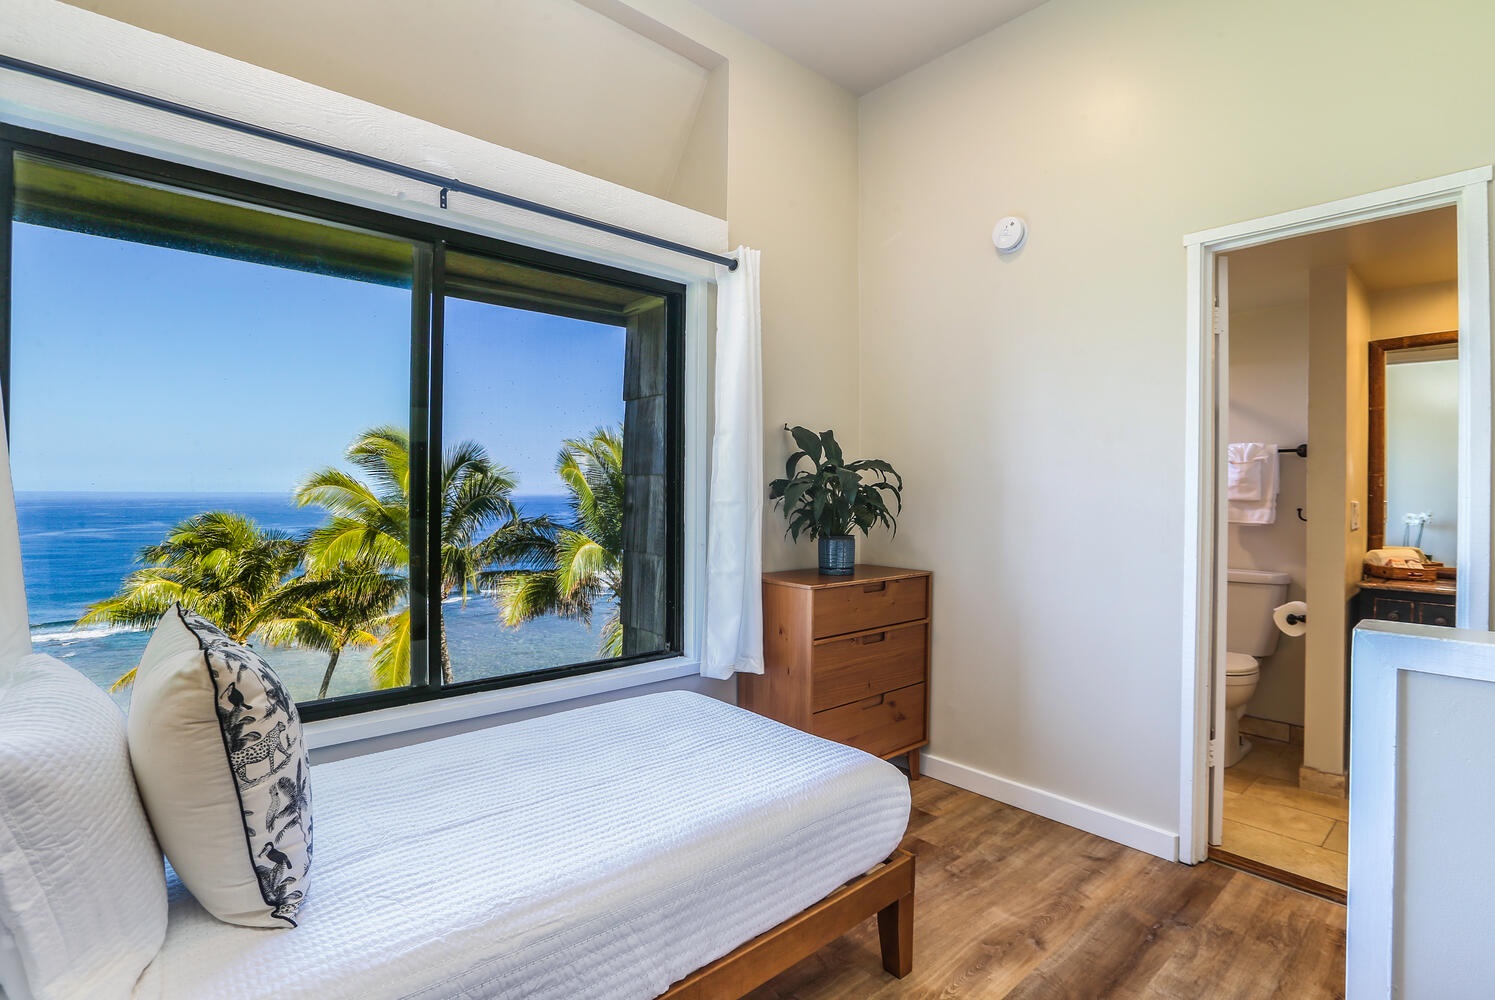 Princeville Vacation Rentals, Sealodge J8 - Wake up and take in the beauty that surrounds you